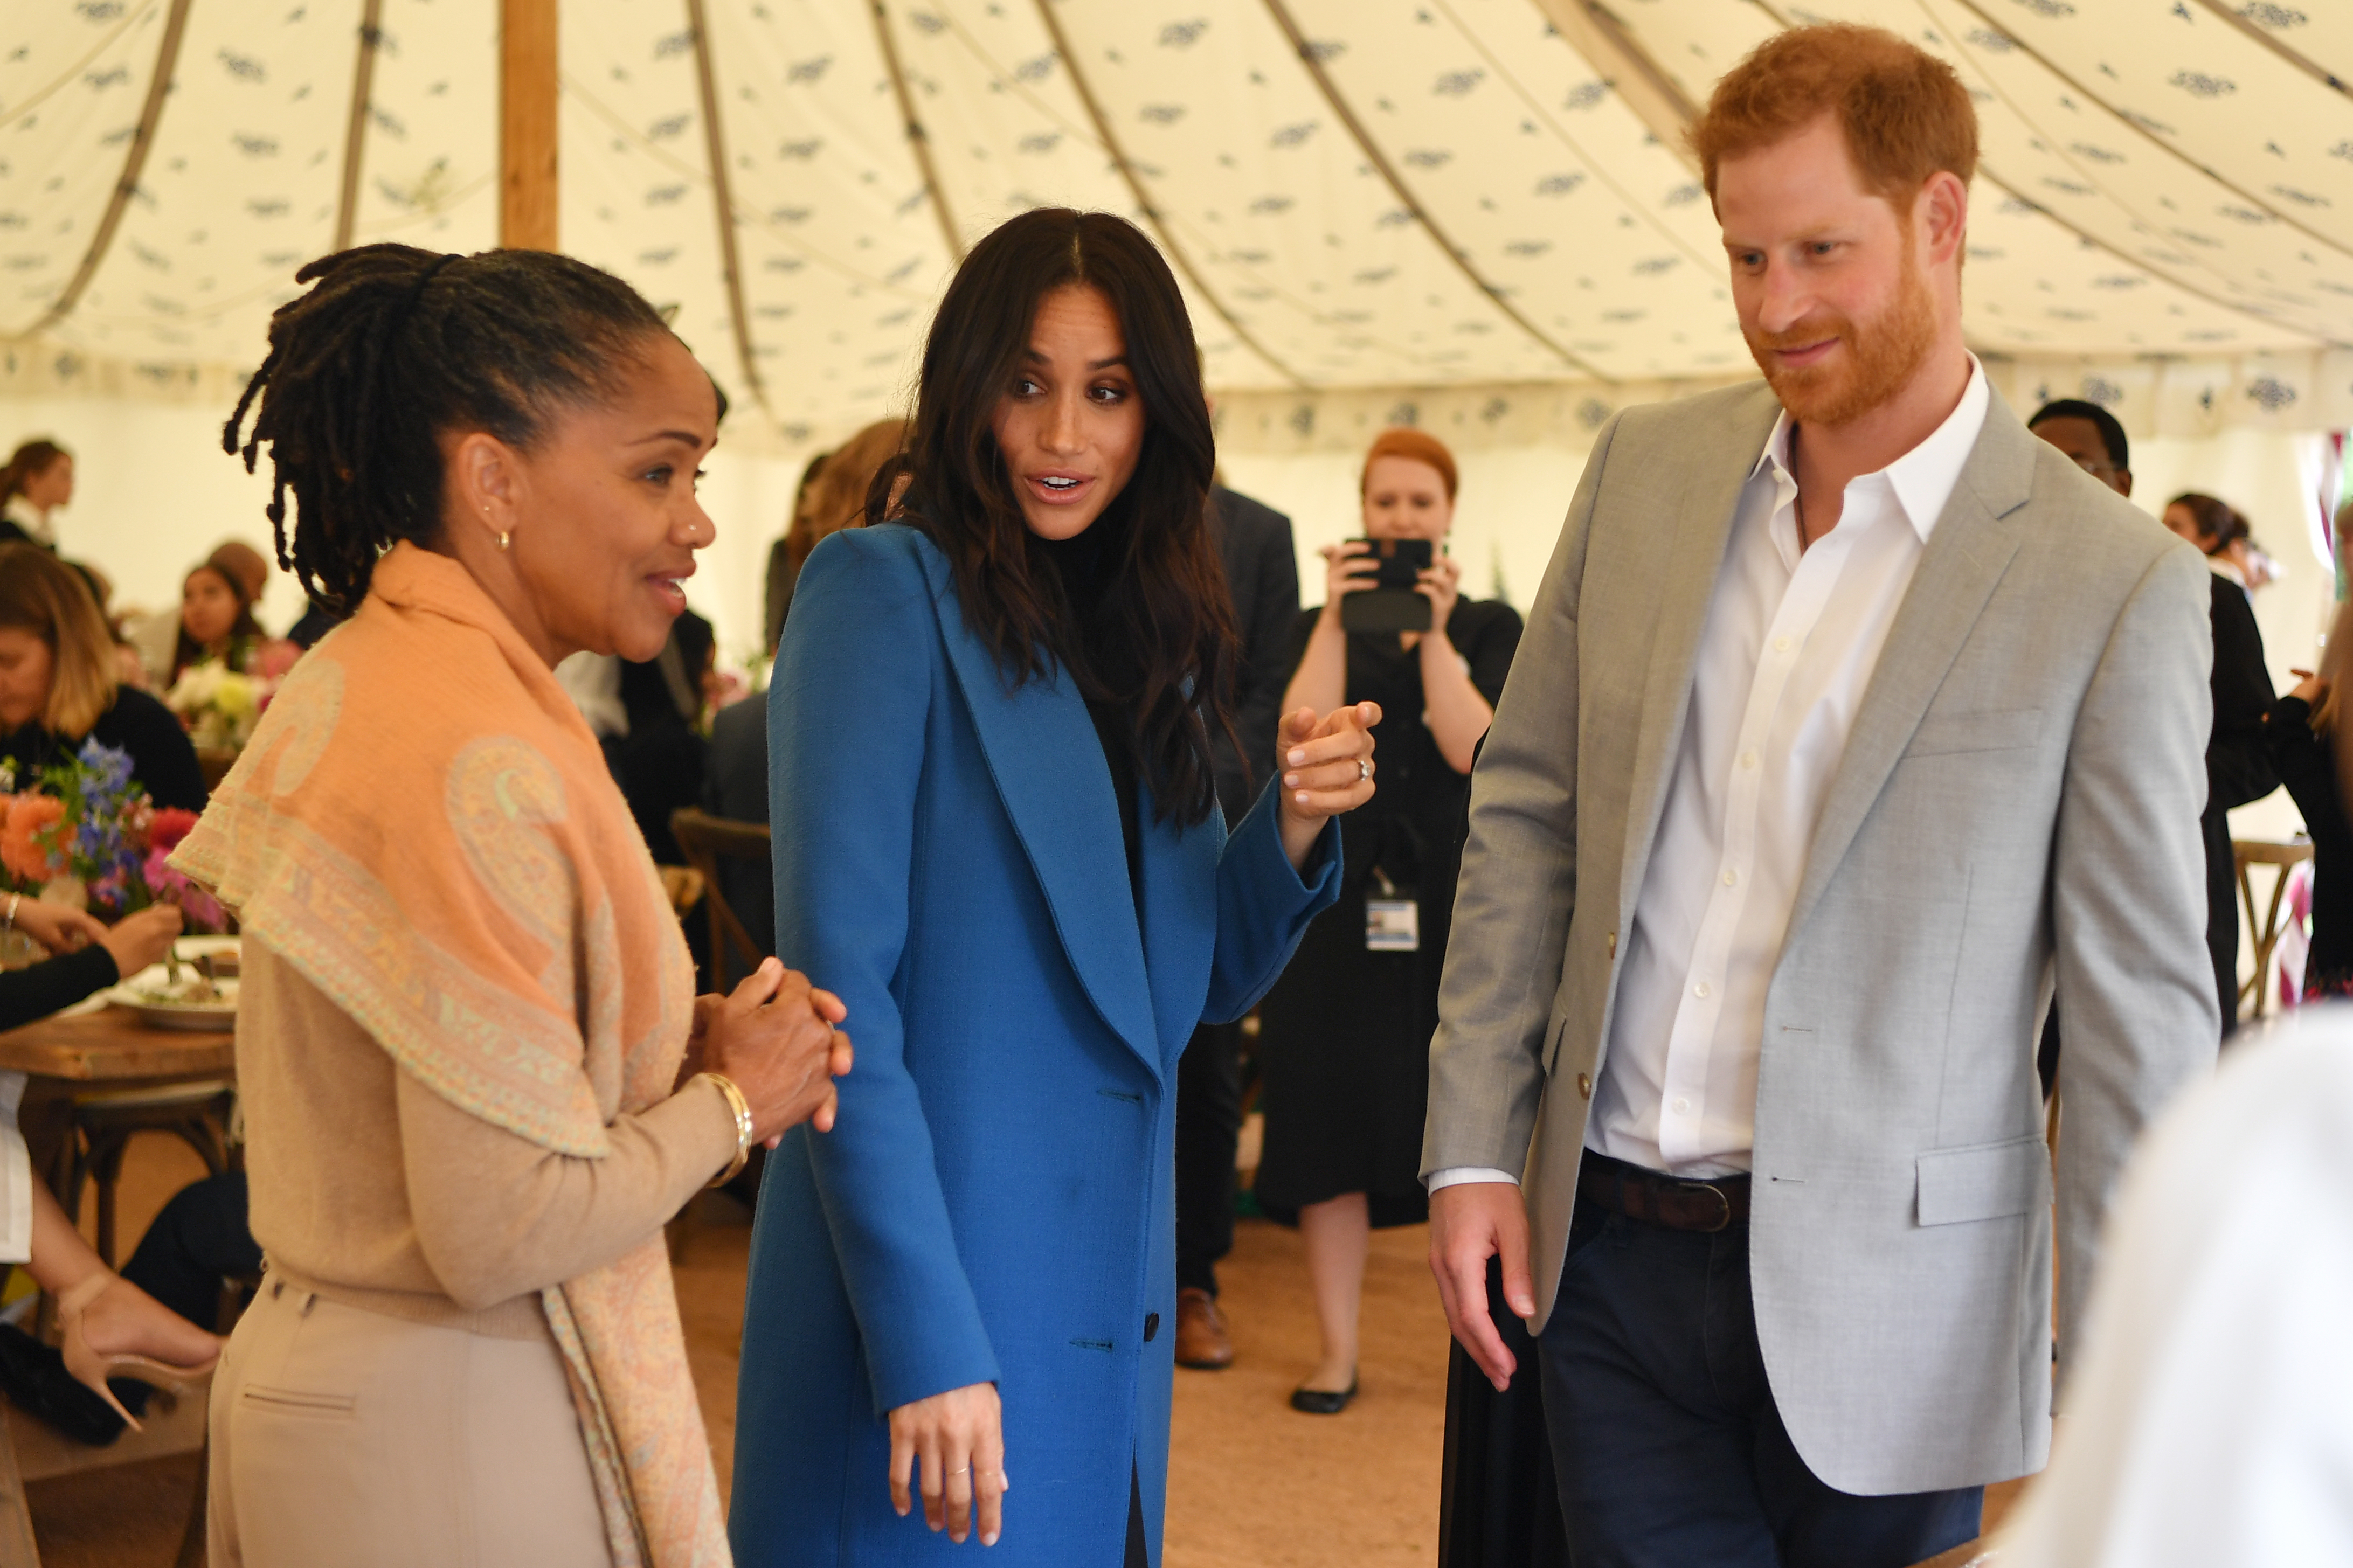 Doria Ragland, Meghan Markle and Prince Harry at the "Together" cookbook launch in London, England on September 20, 2018 | Source: Getty Images